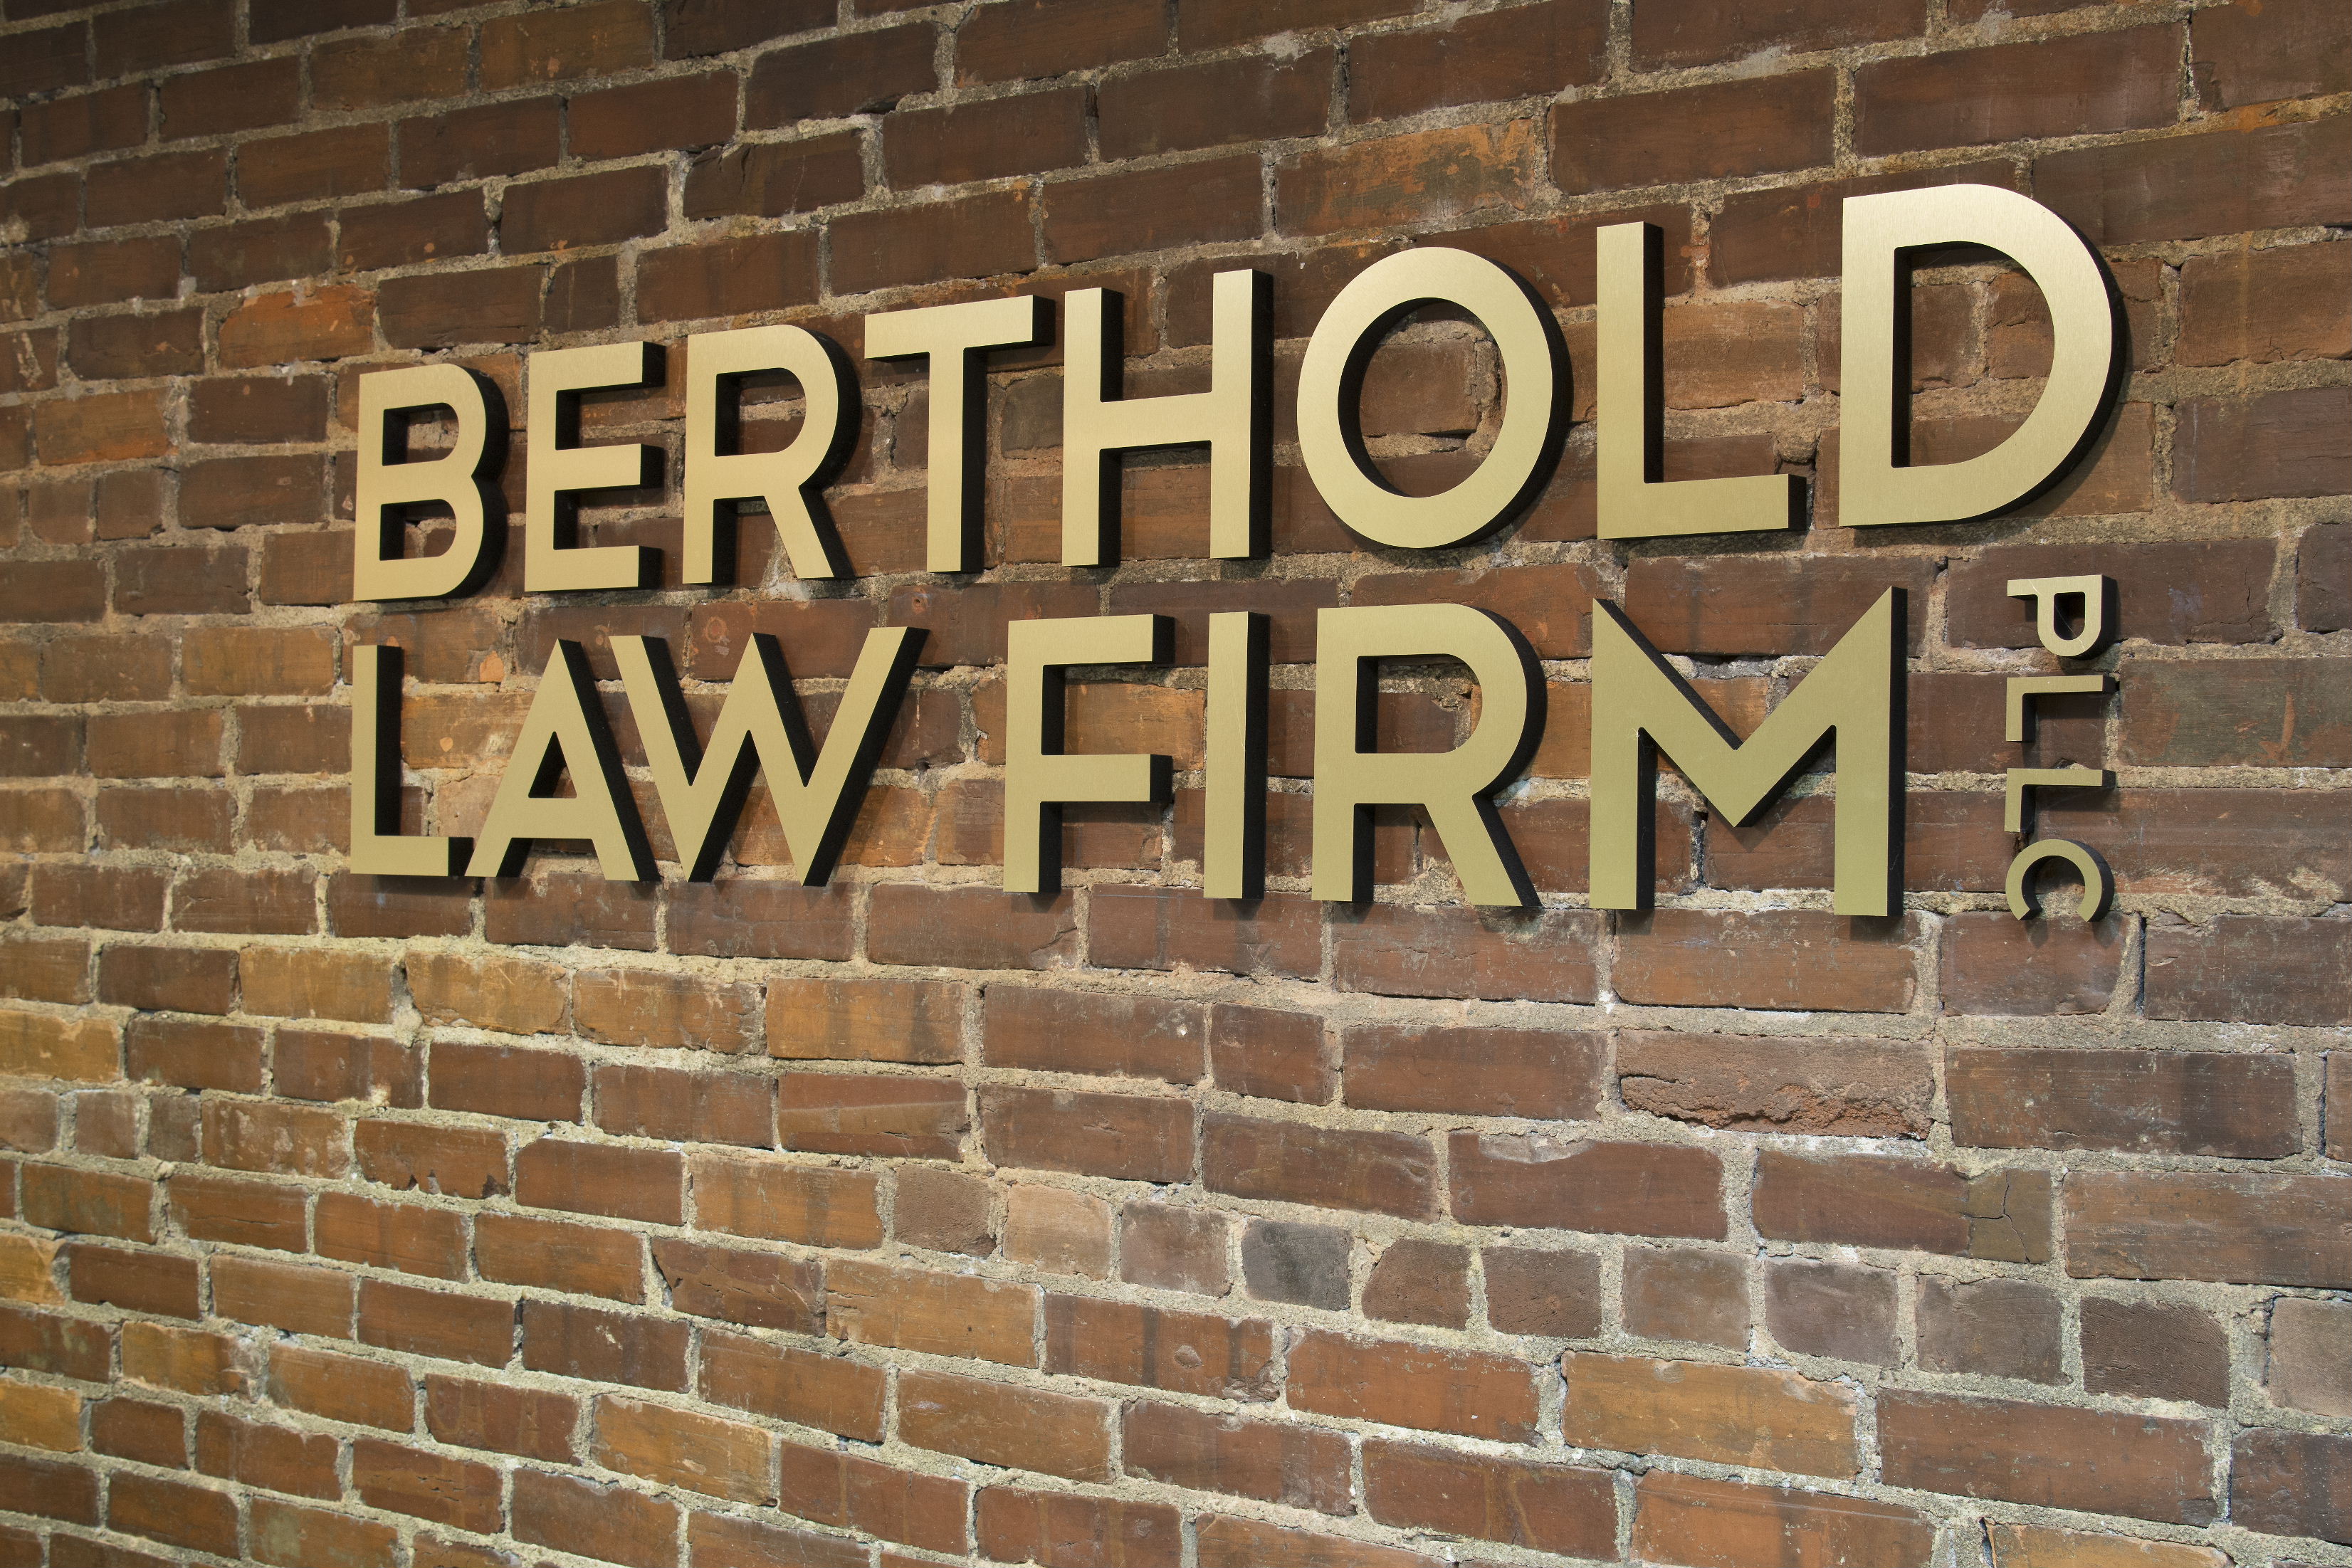 Interior sign for Berthold Law Firm.